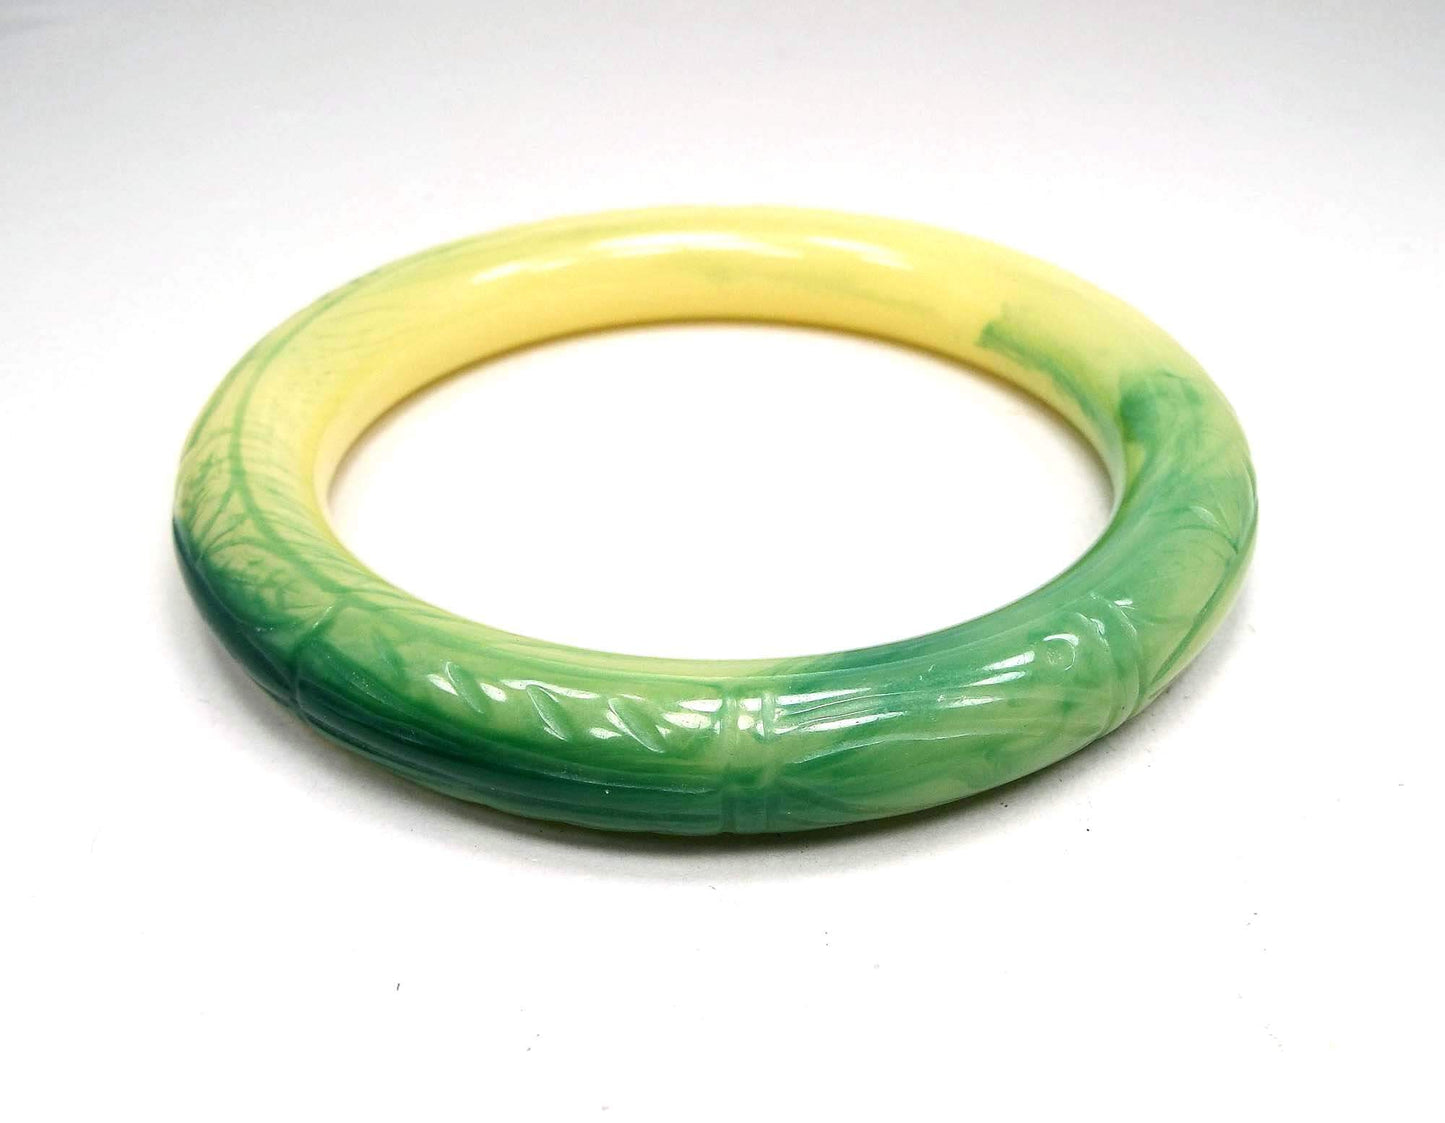 Green and Yellow Vintage Lucite Bangle Bracelet